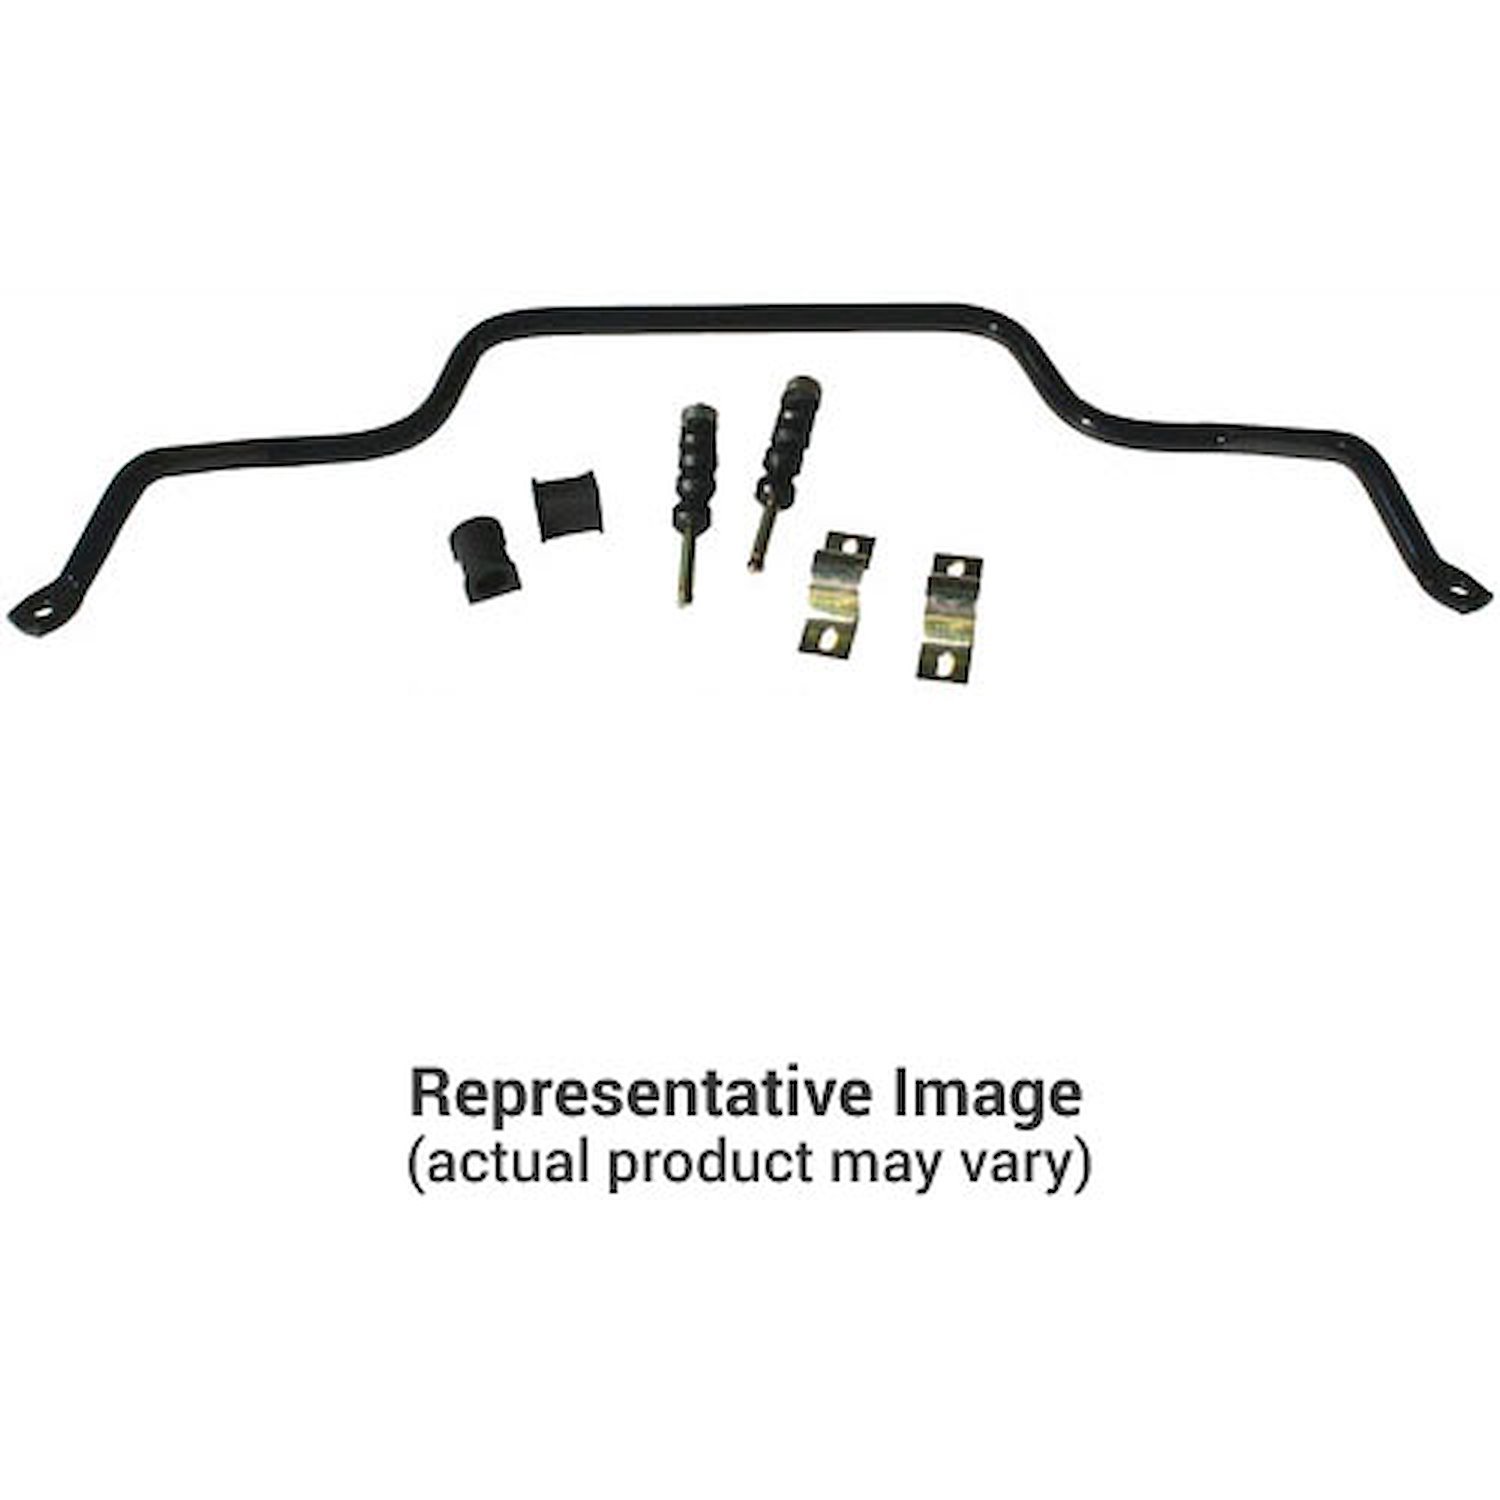 7/8" Front Sway Bar 1966-70 Ford Falcon